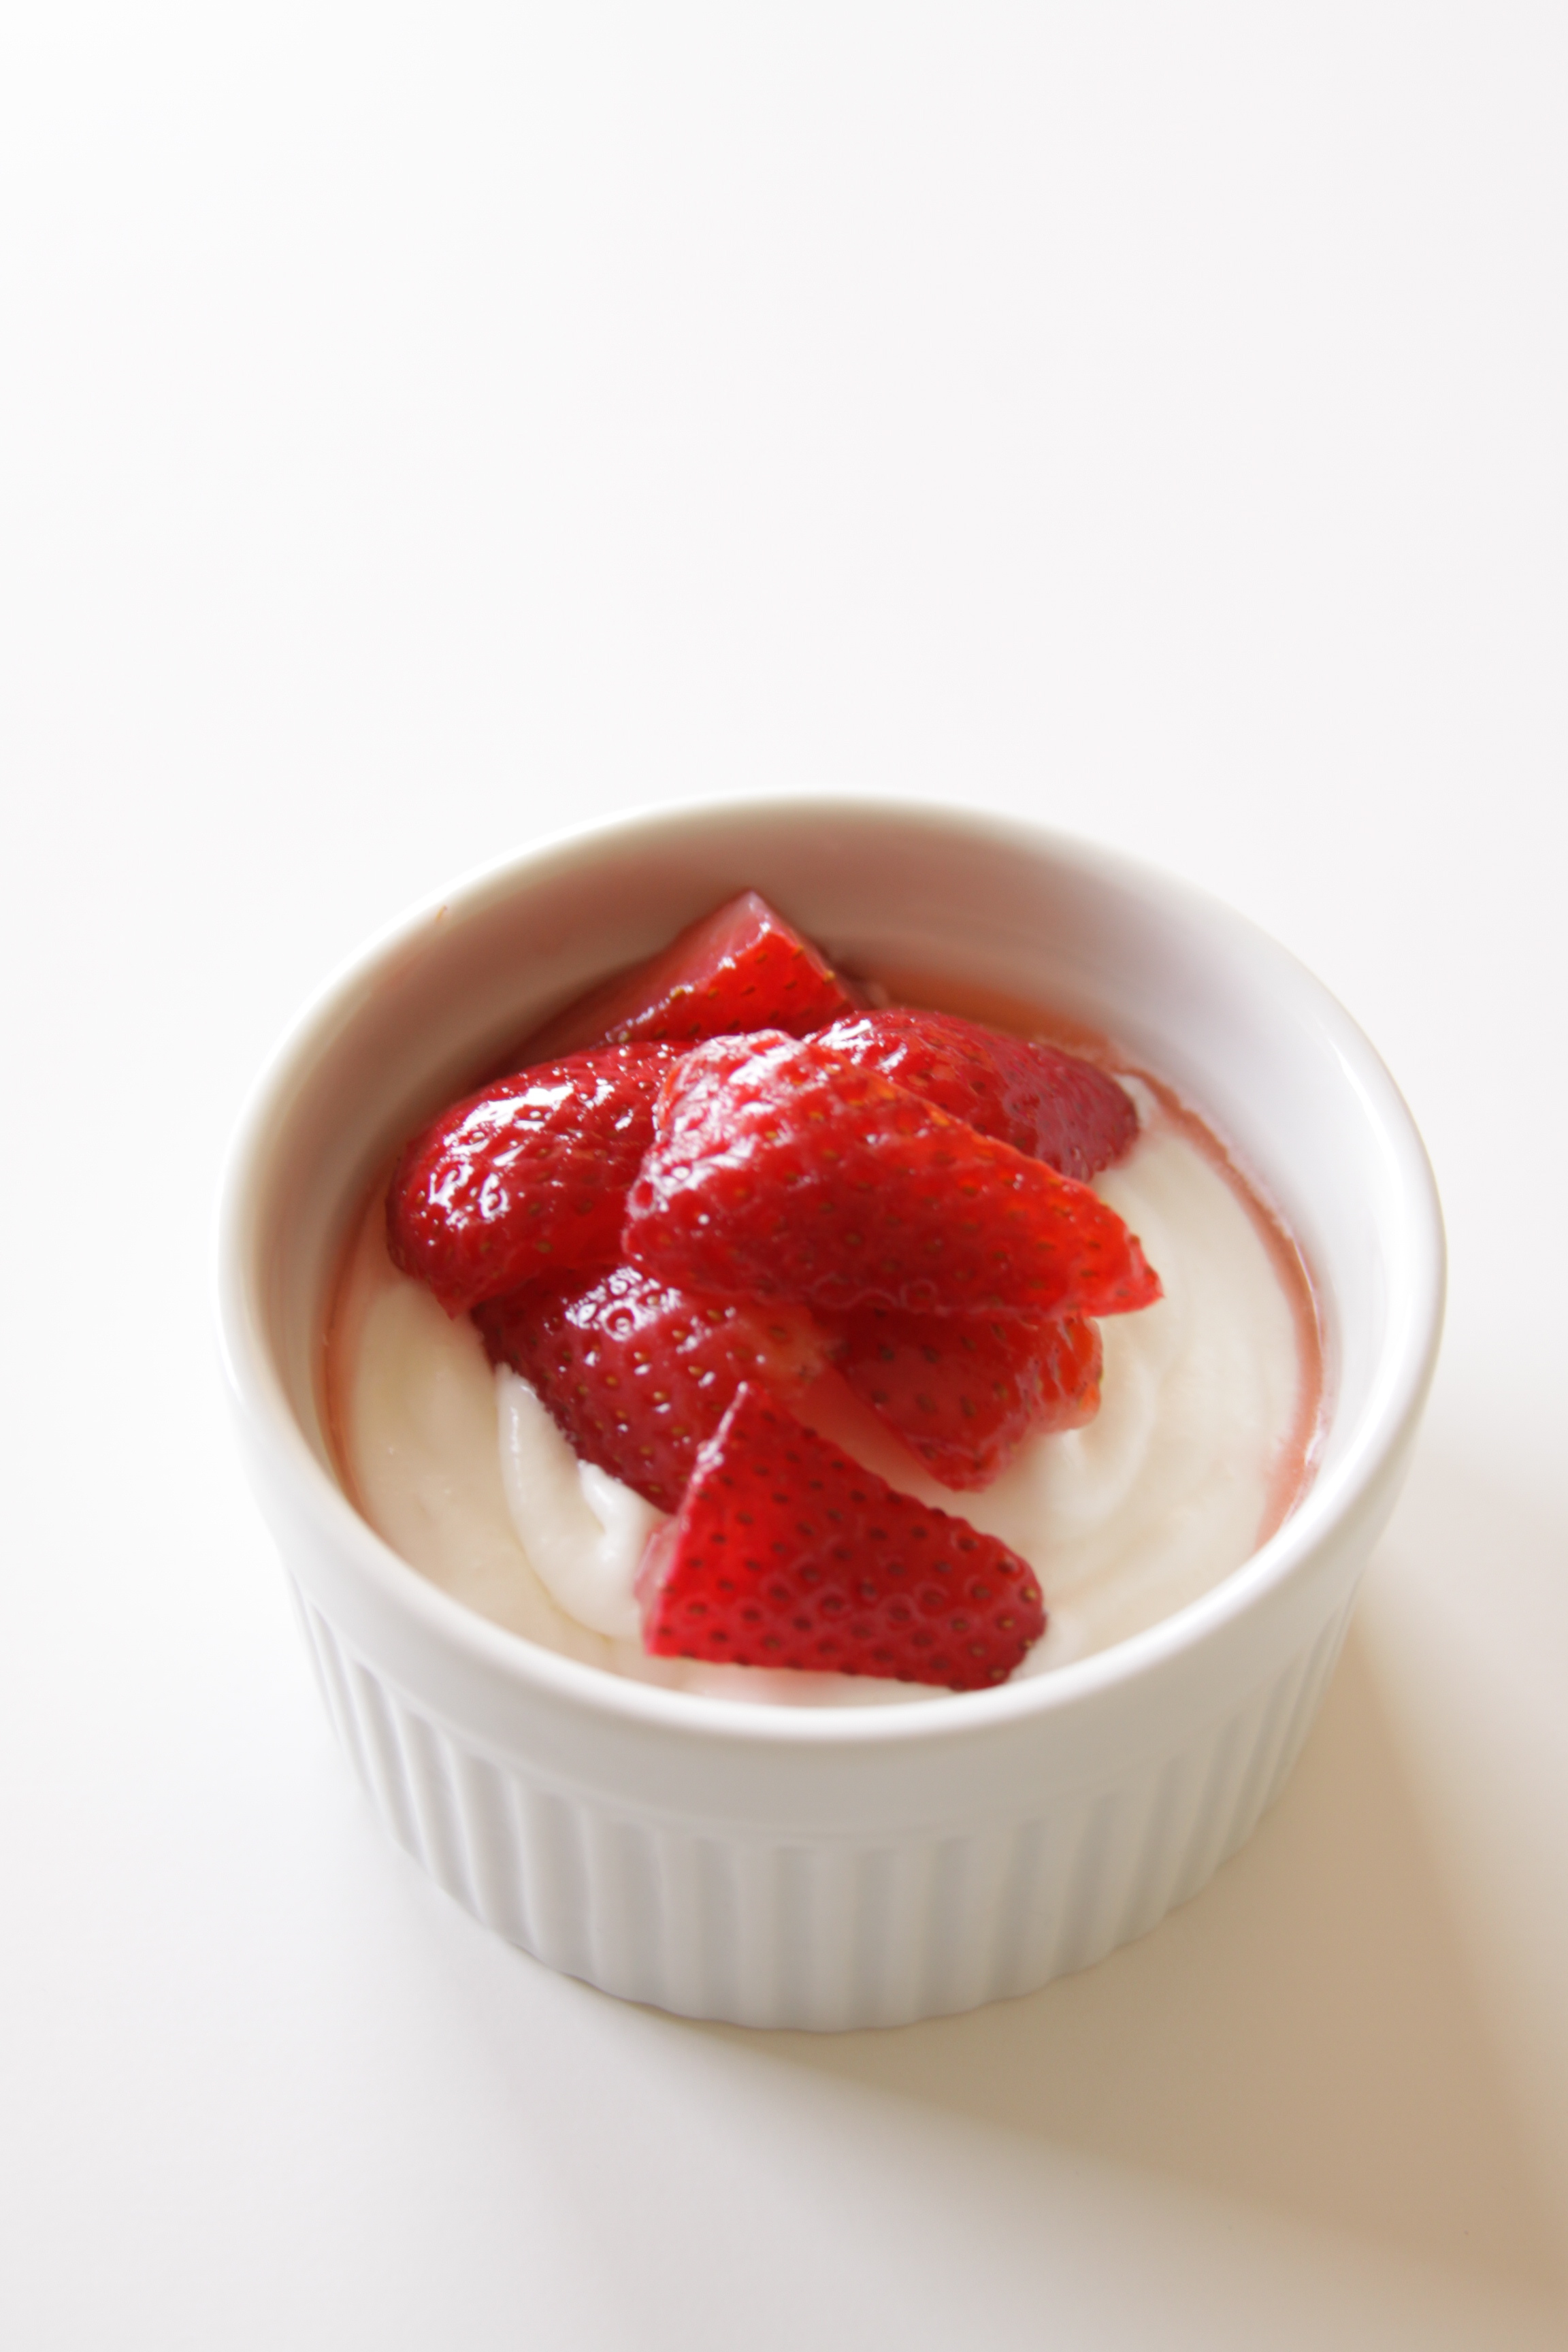 Buttermilk Creams with Strawberries